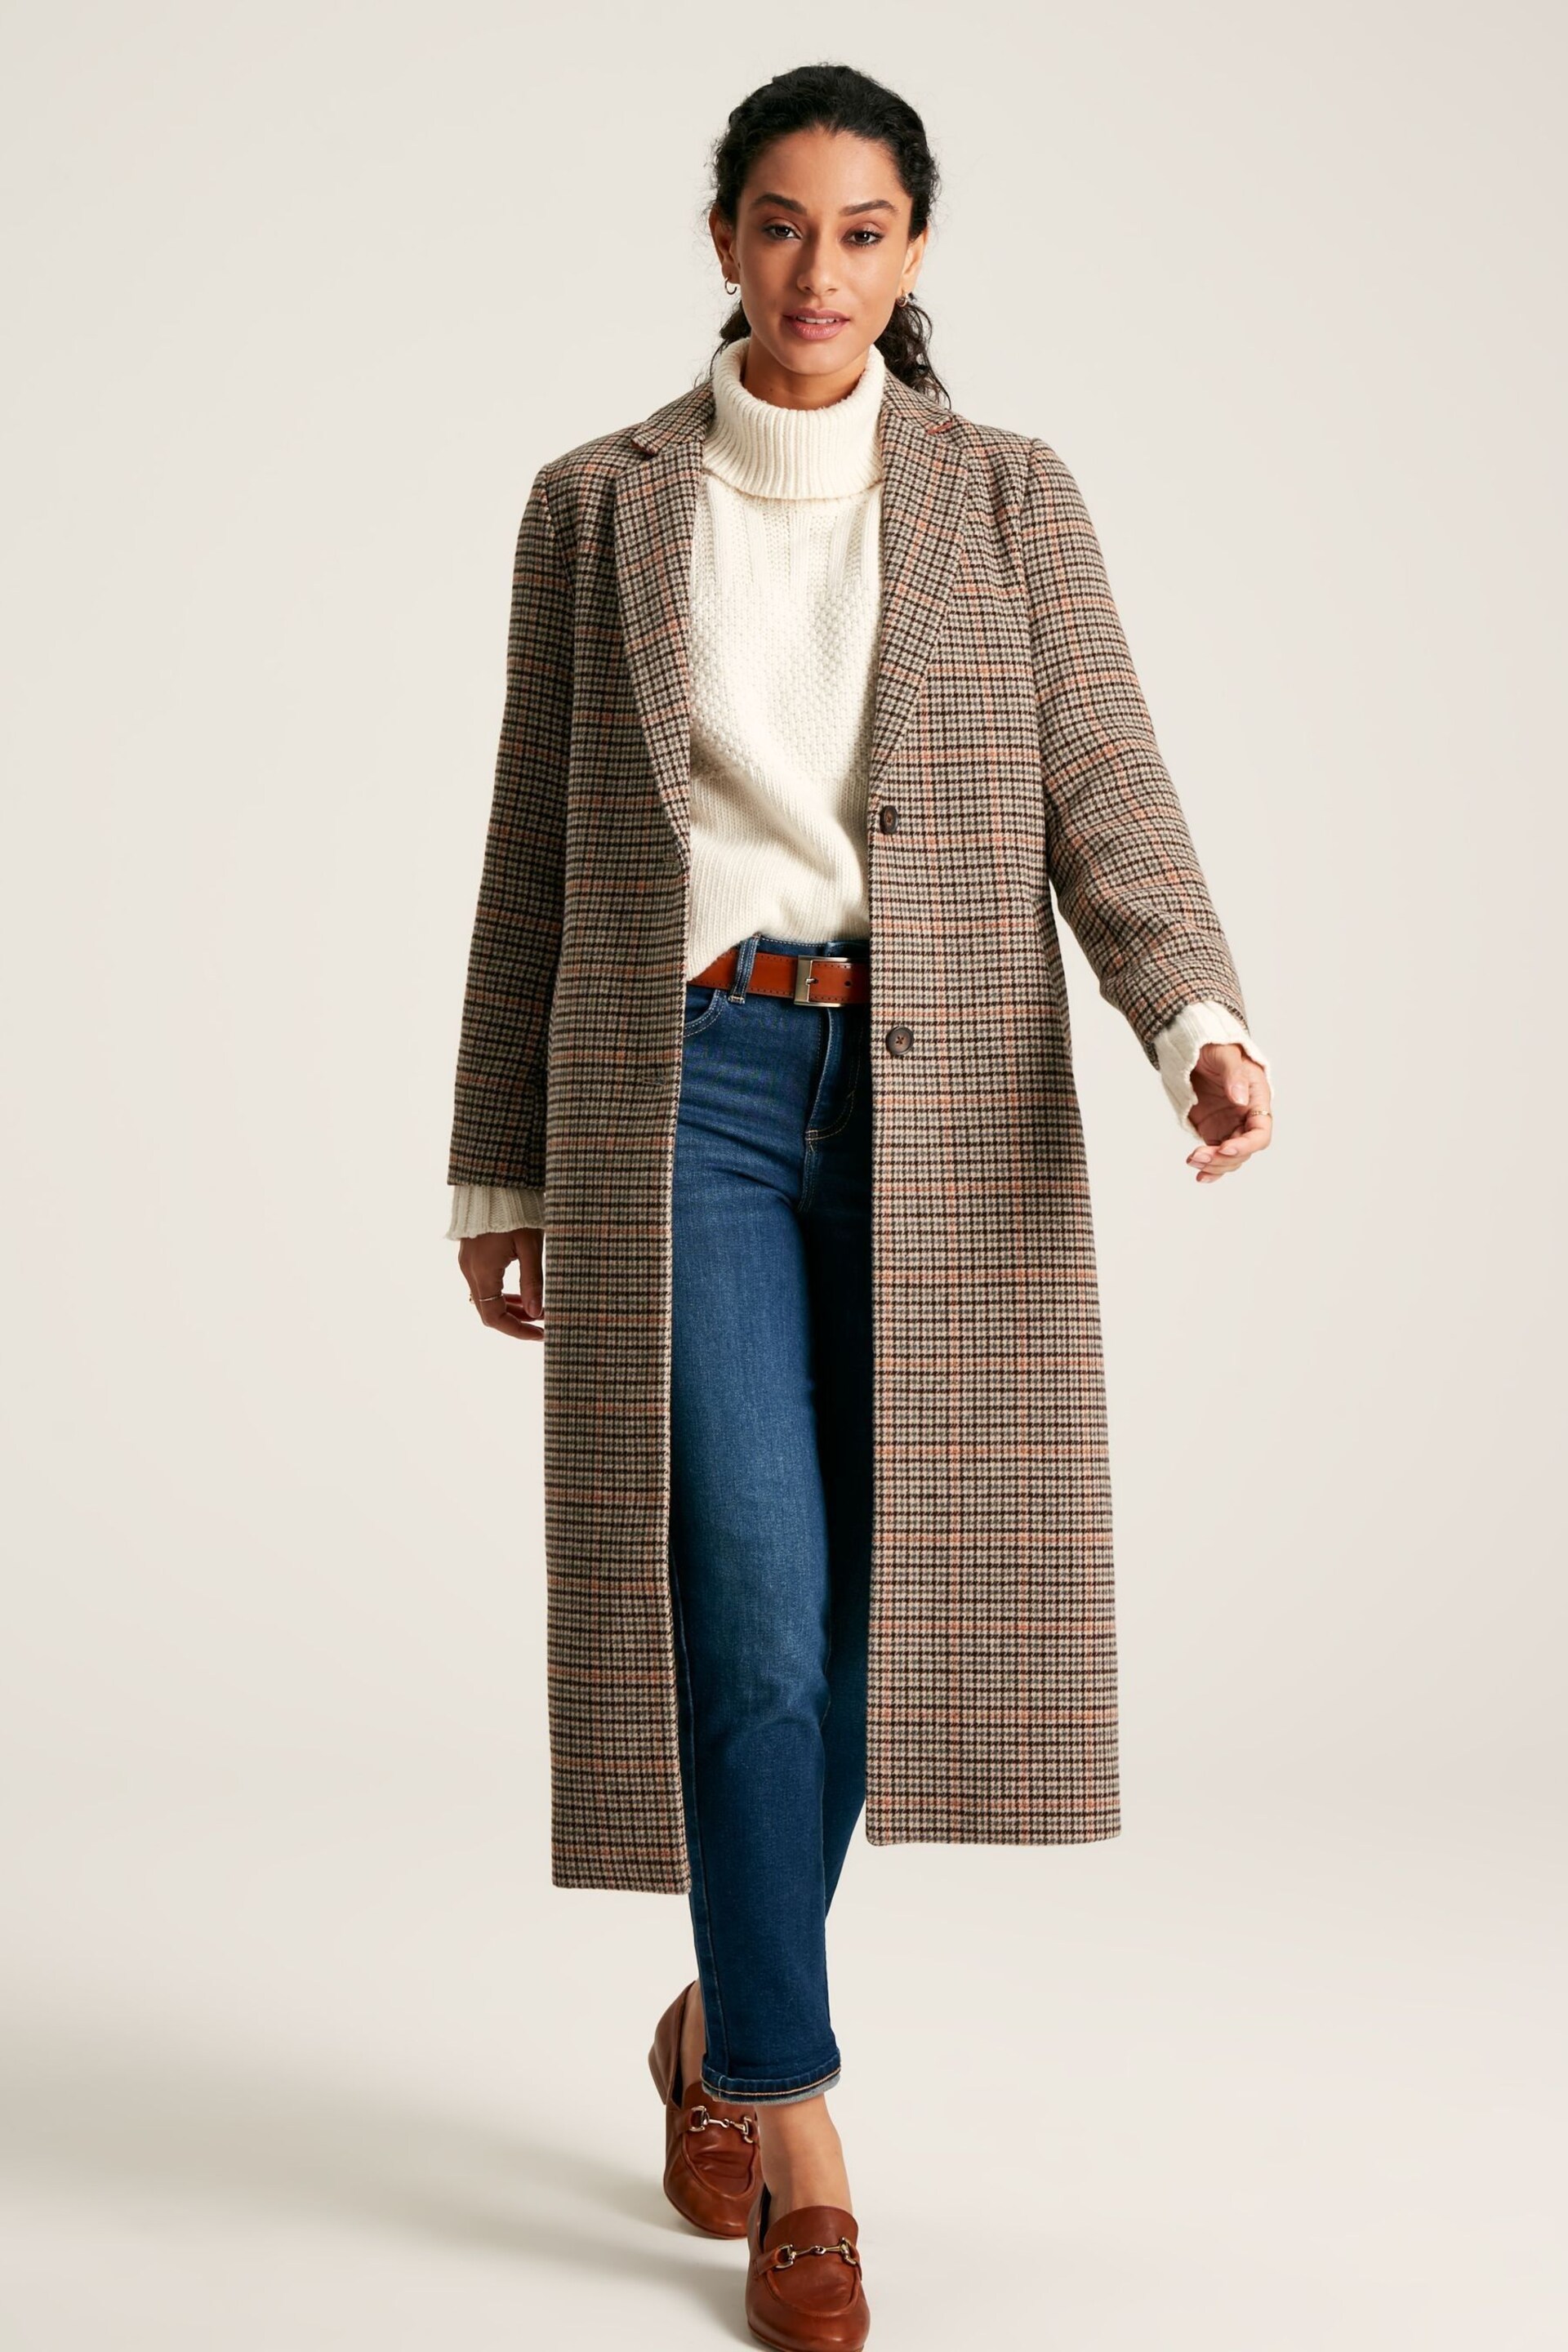 Joules Harrow Check Wool Blend Coat - Image 5 of 10